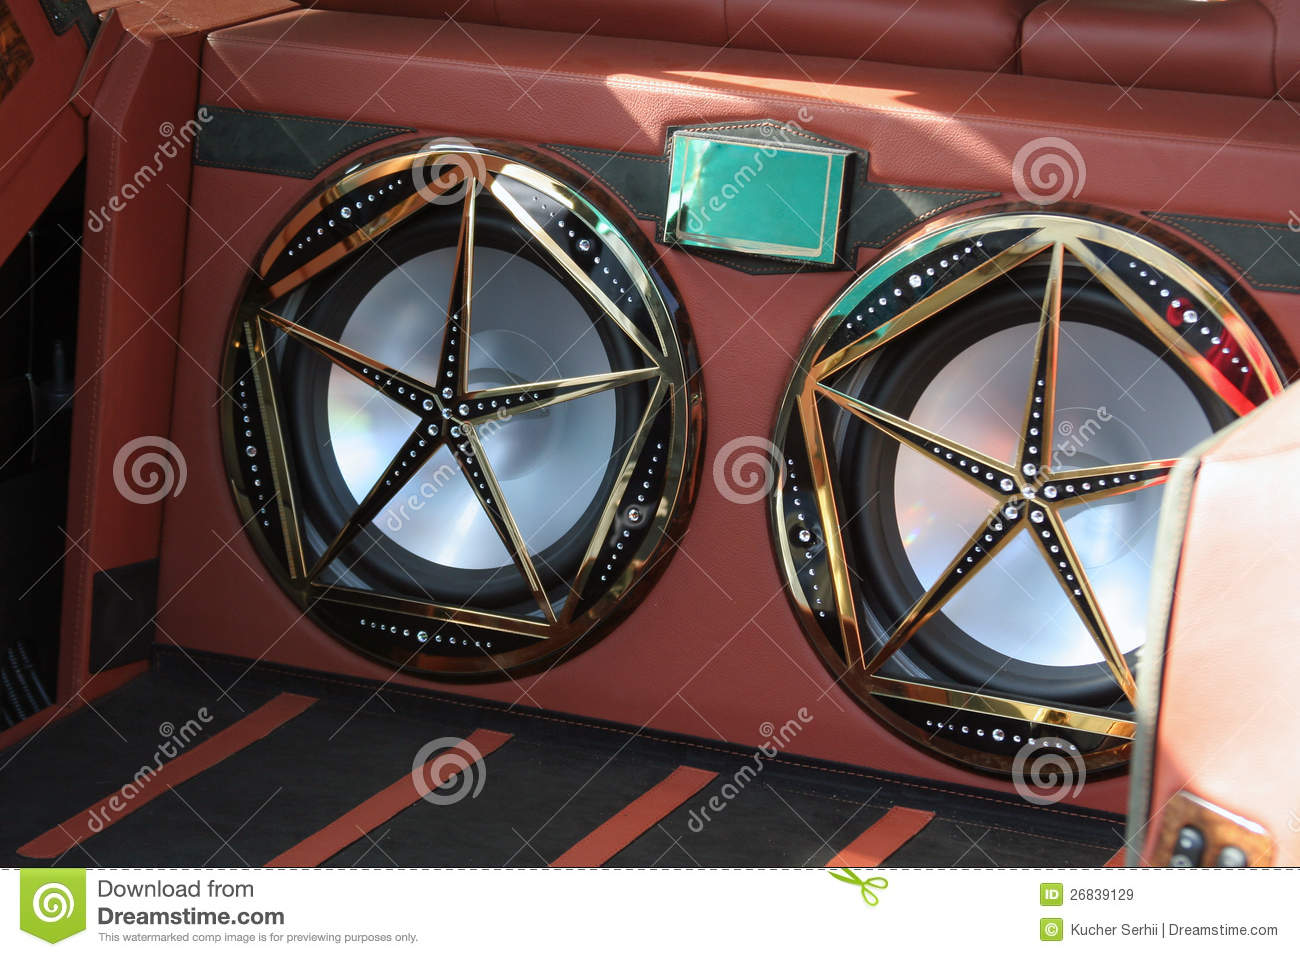 Car Speakers Royalty Free Stock Images   Image  26839129